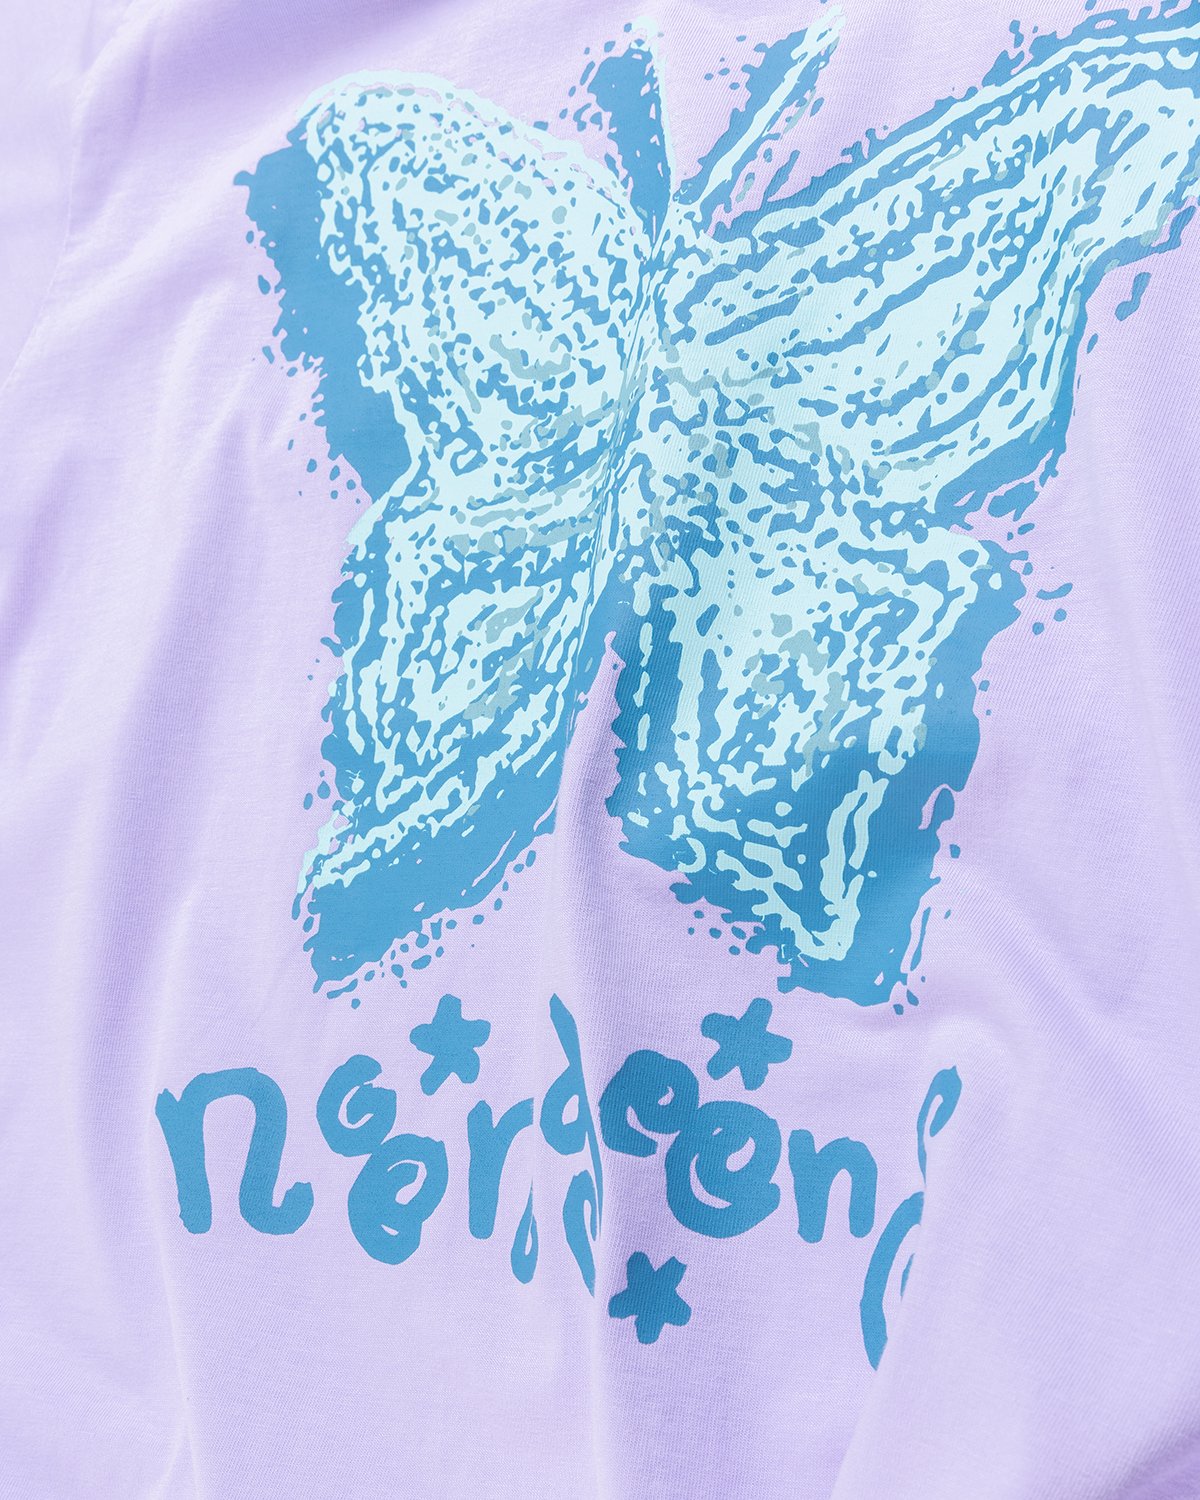 Noon Goons - Fly High T-Shirt Lavender - Clothing - Purple - Image 3